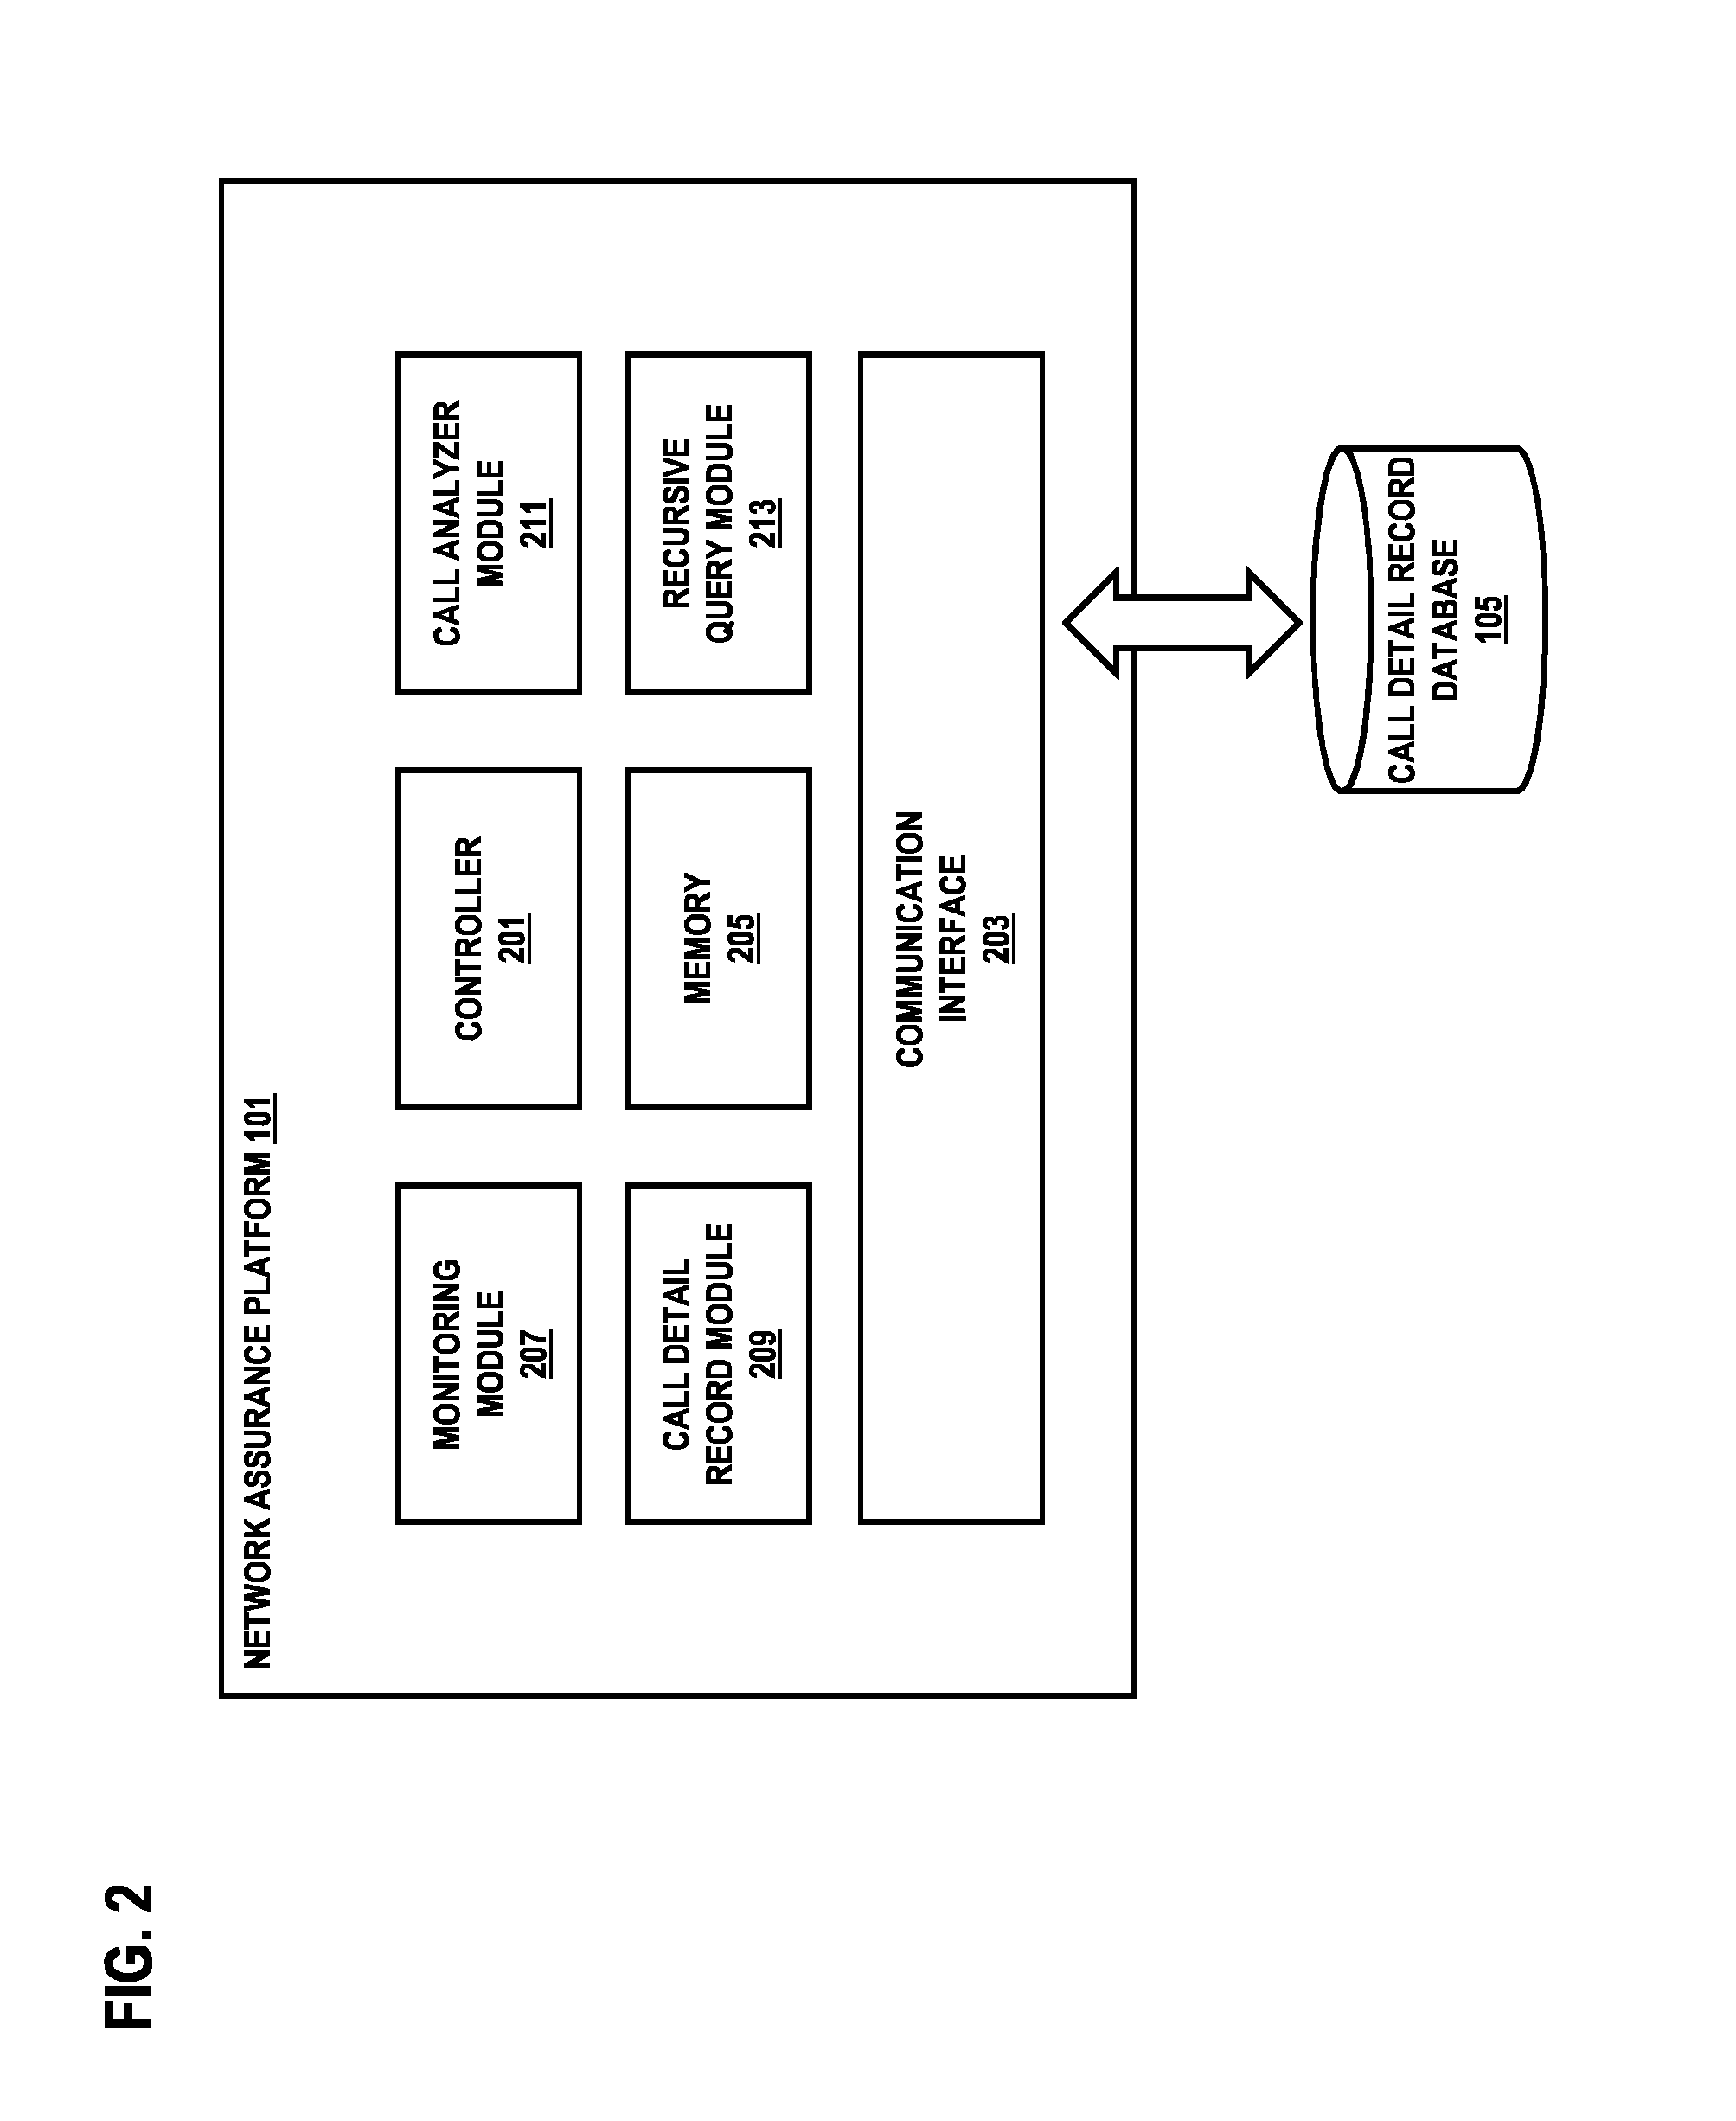 System and method for providing proactive service assurance in emergency networks